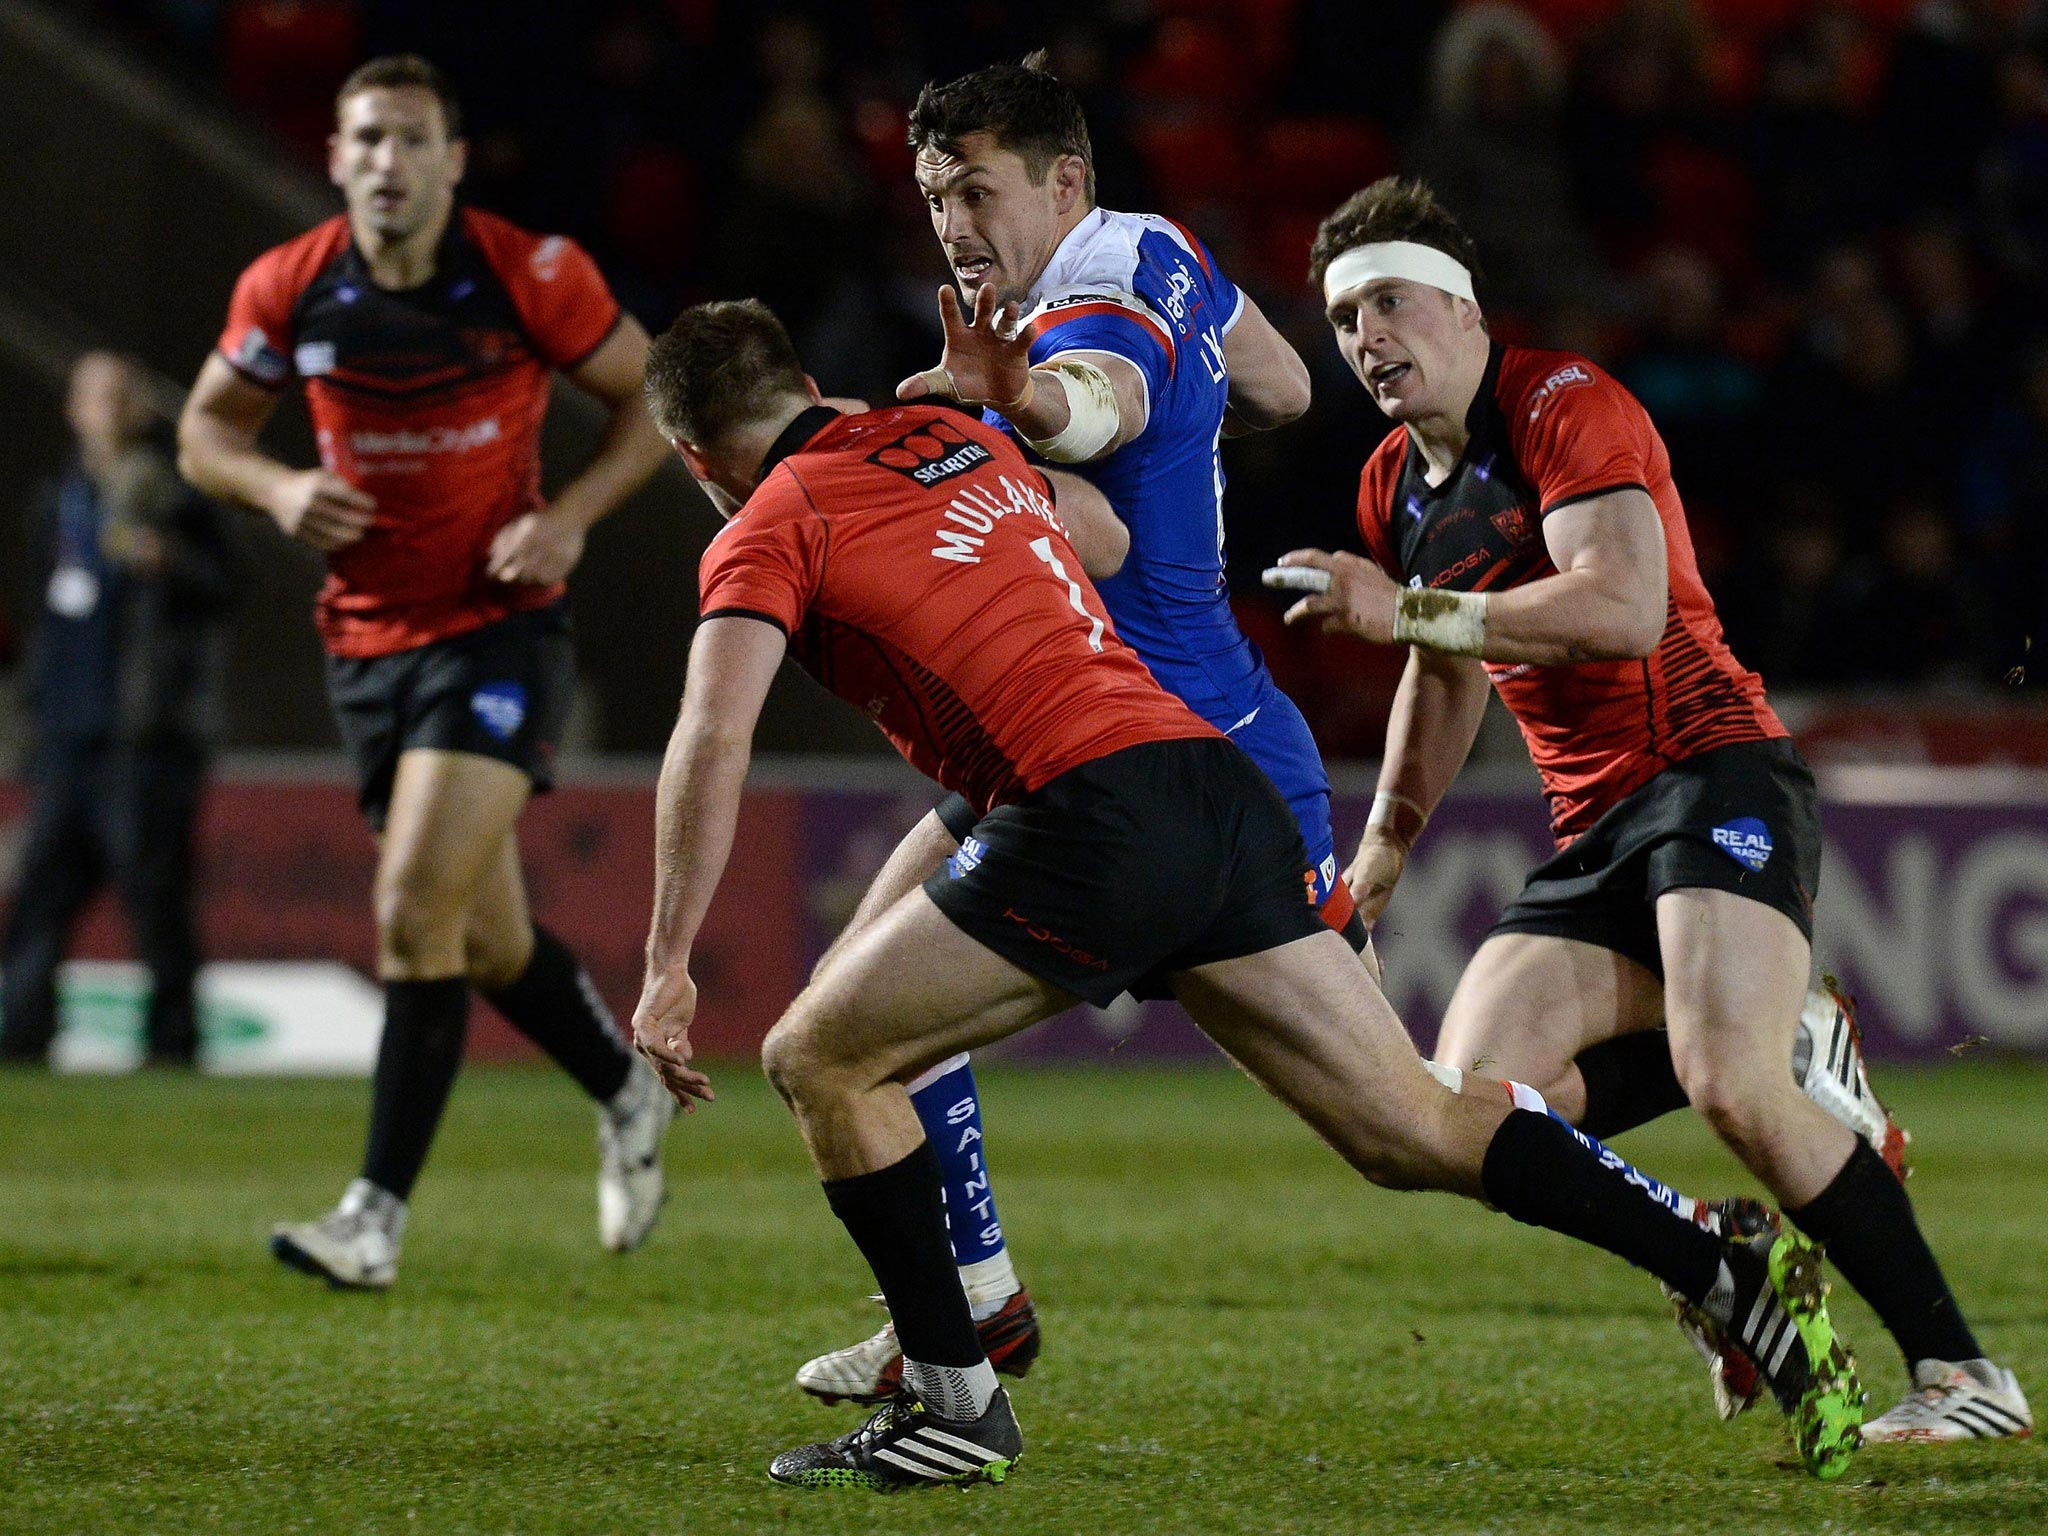 Jon Wilkin surges past the Salford cover for St Helens’s first try